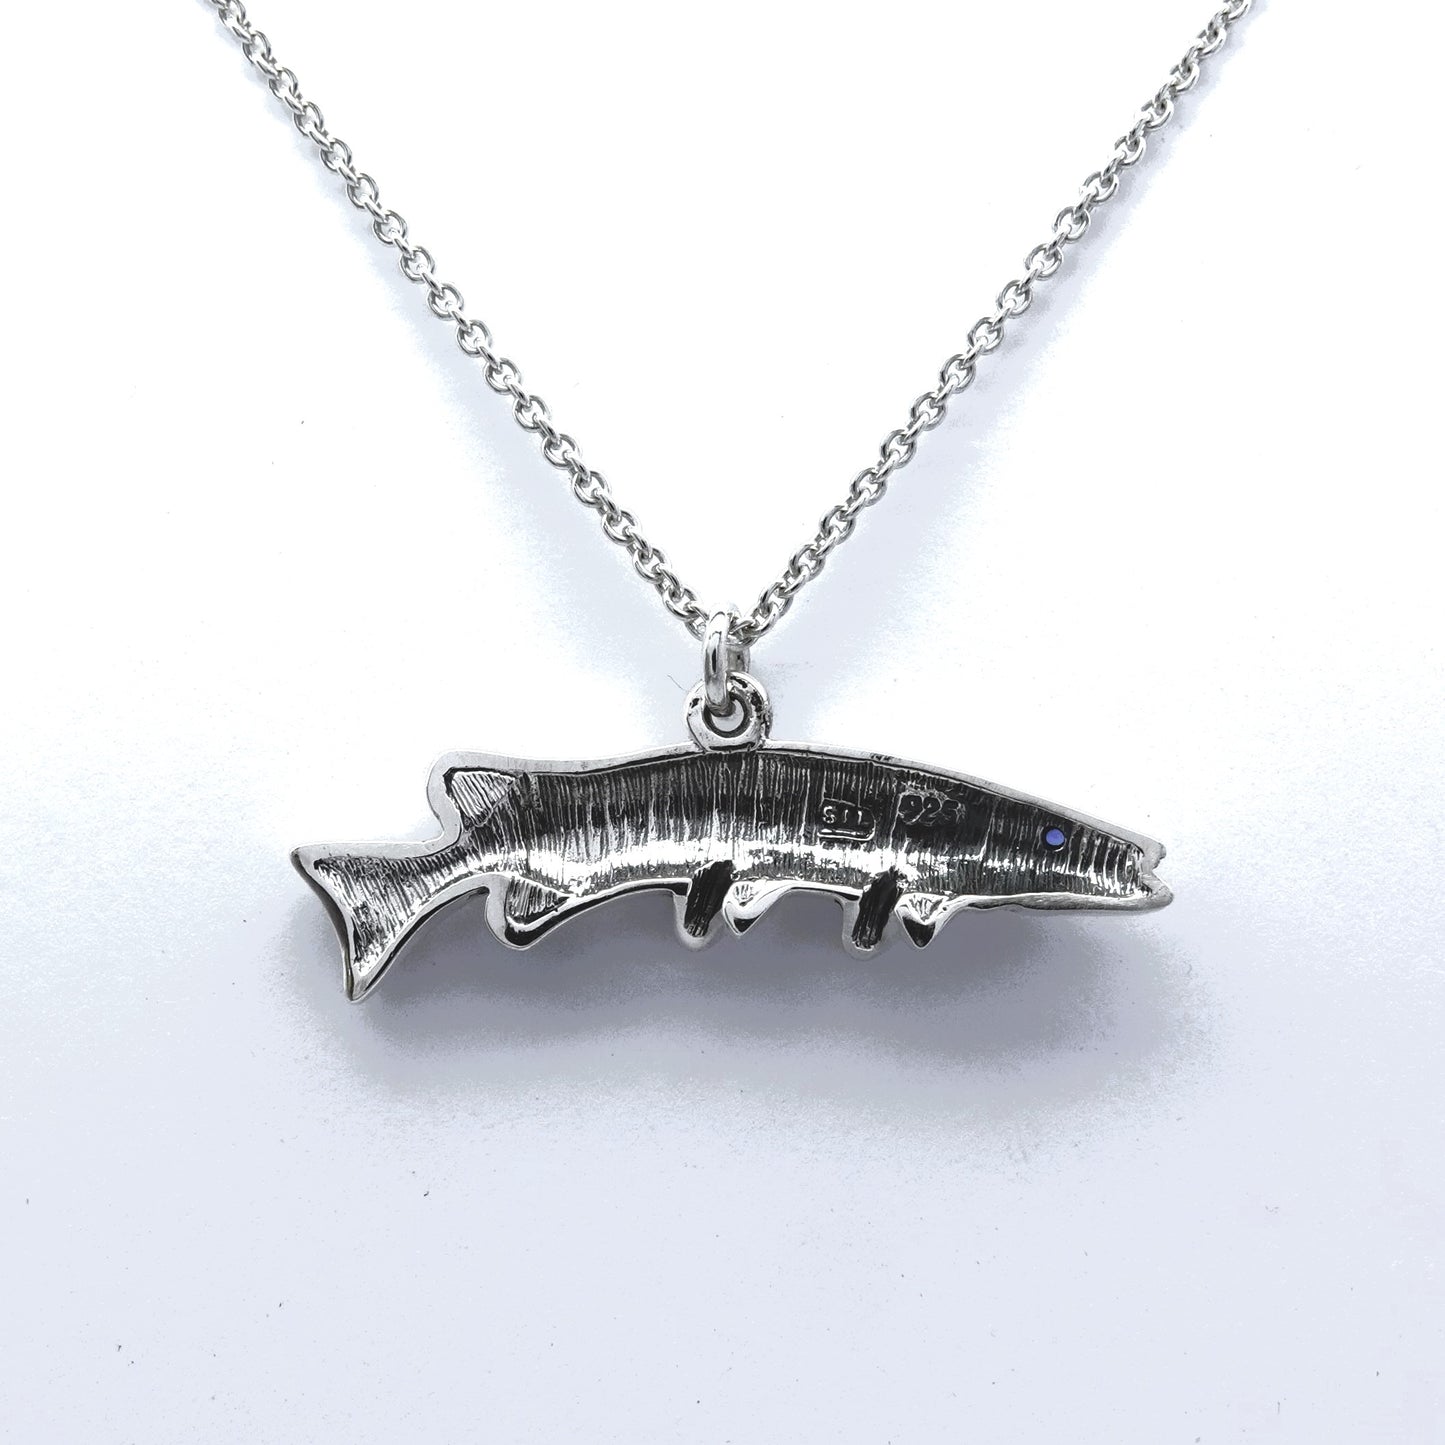 Pike fishing necklace. Made from sterling silver with an antiqued finish, set with a gemstone eye.. Ideal fisherman’s angling gift © Adrian Ashley